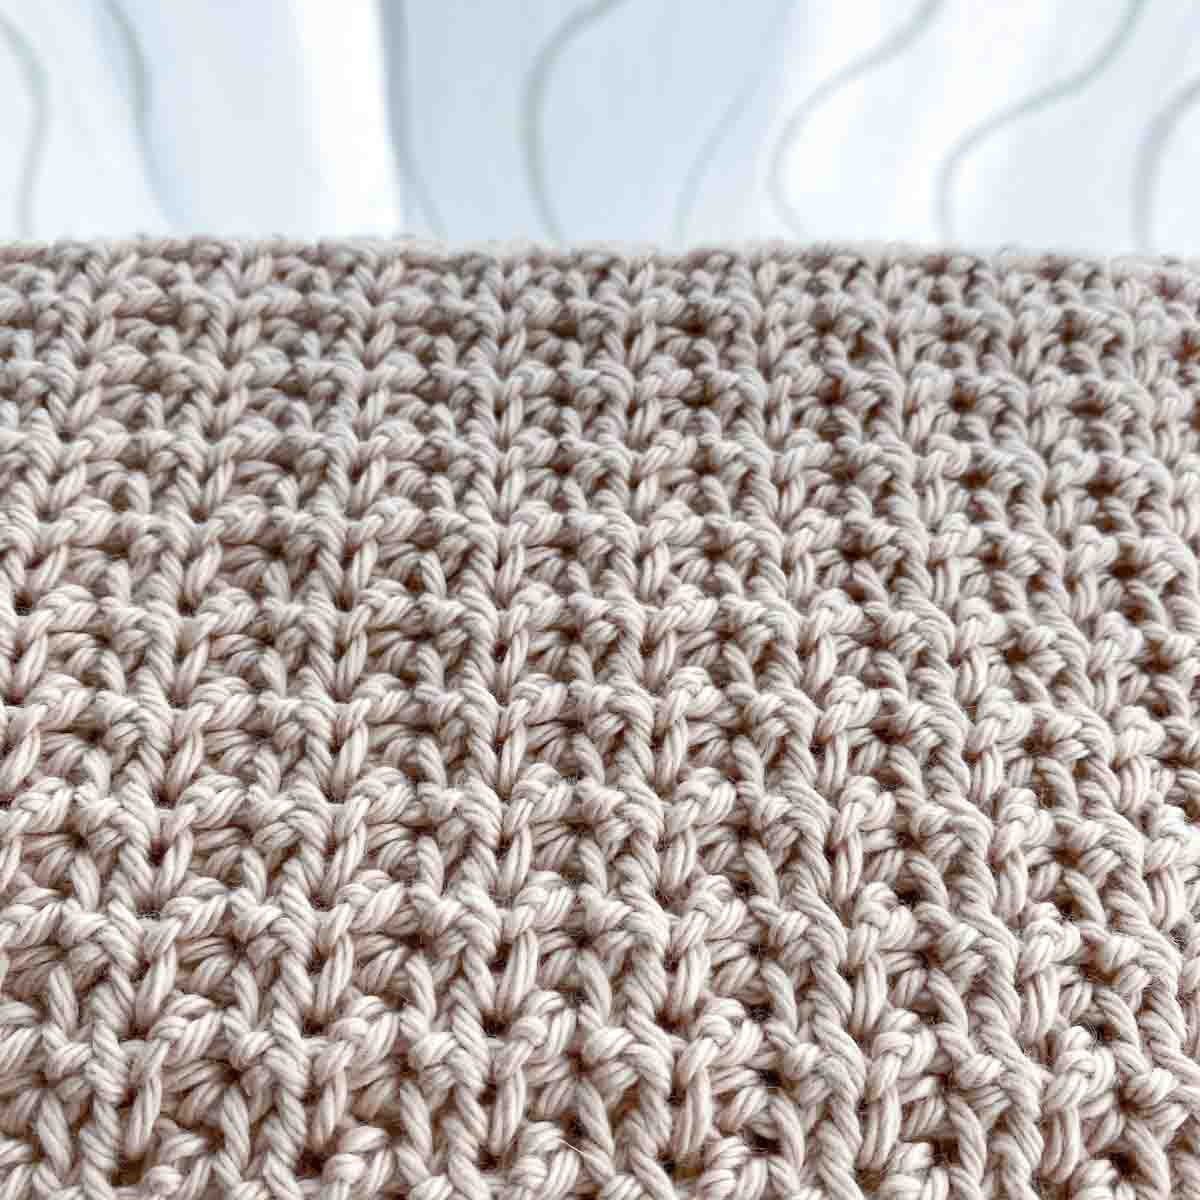 close up of the texture of crochet stitches on a hand towel